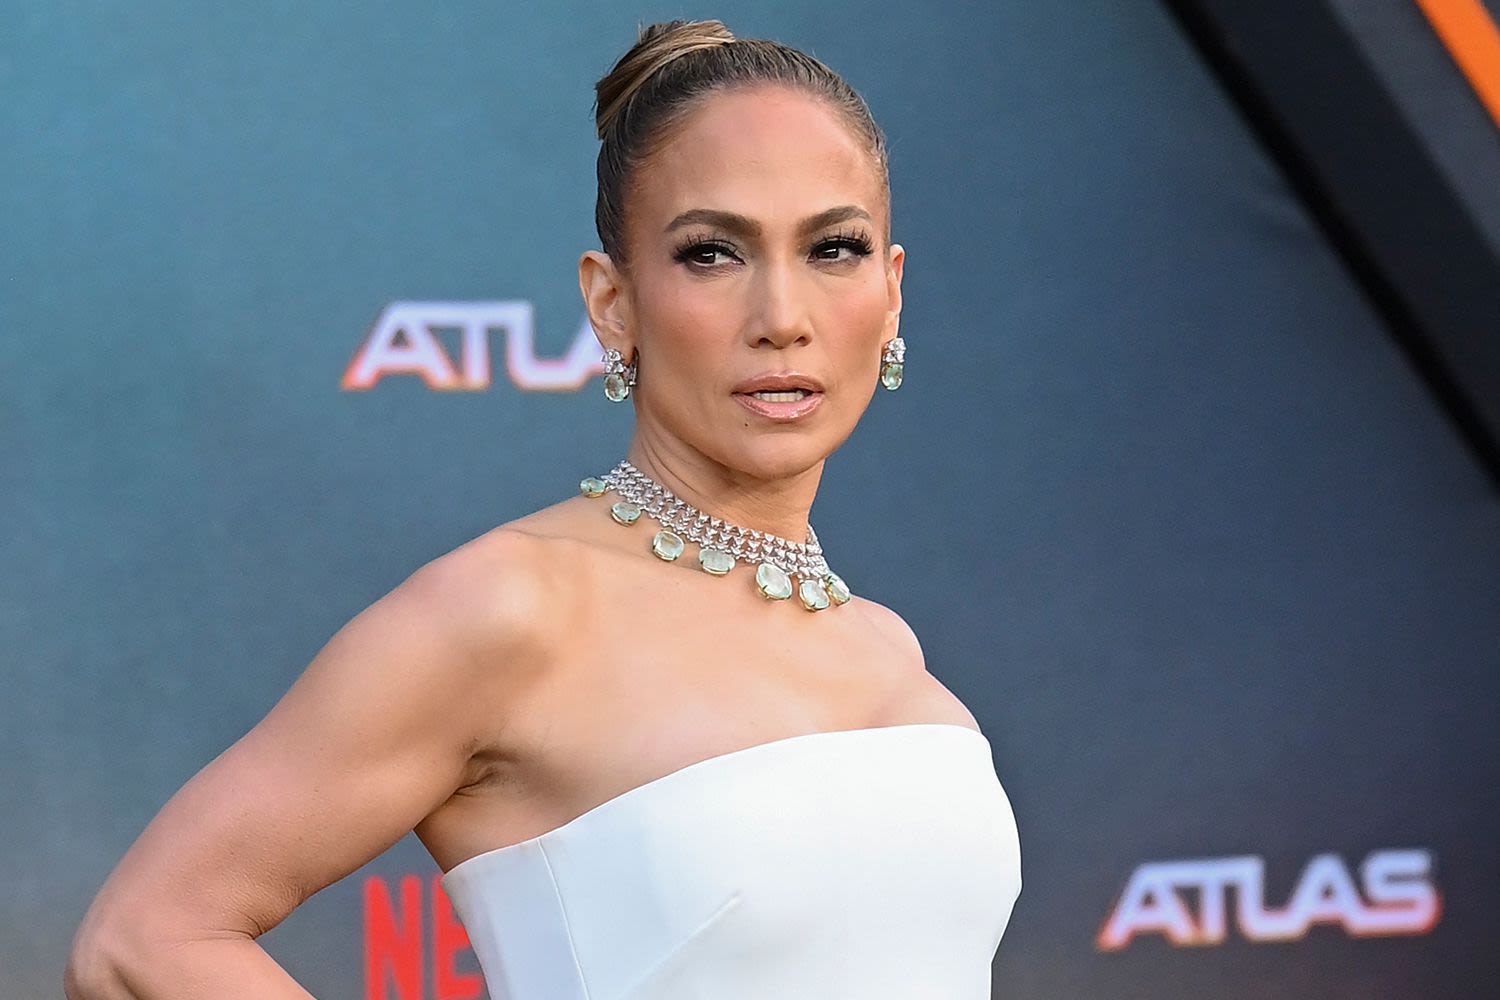 Jennifer Lopez Bares Arms in Black and White Sleeveless Look at Premiere of Netflix Action Flick “Atlas”